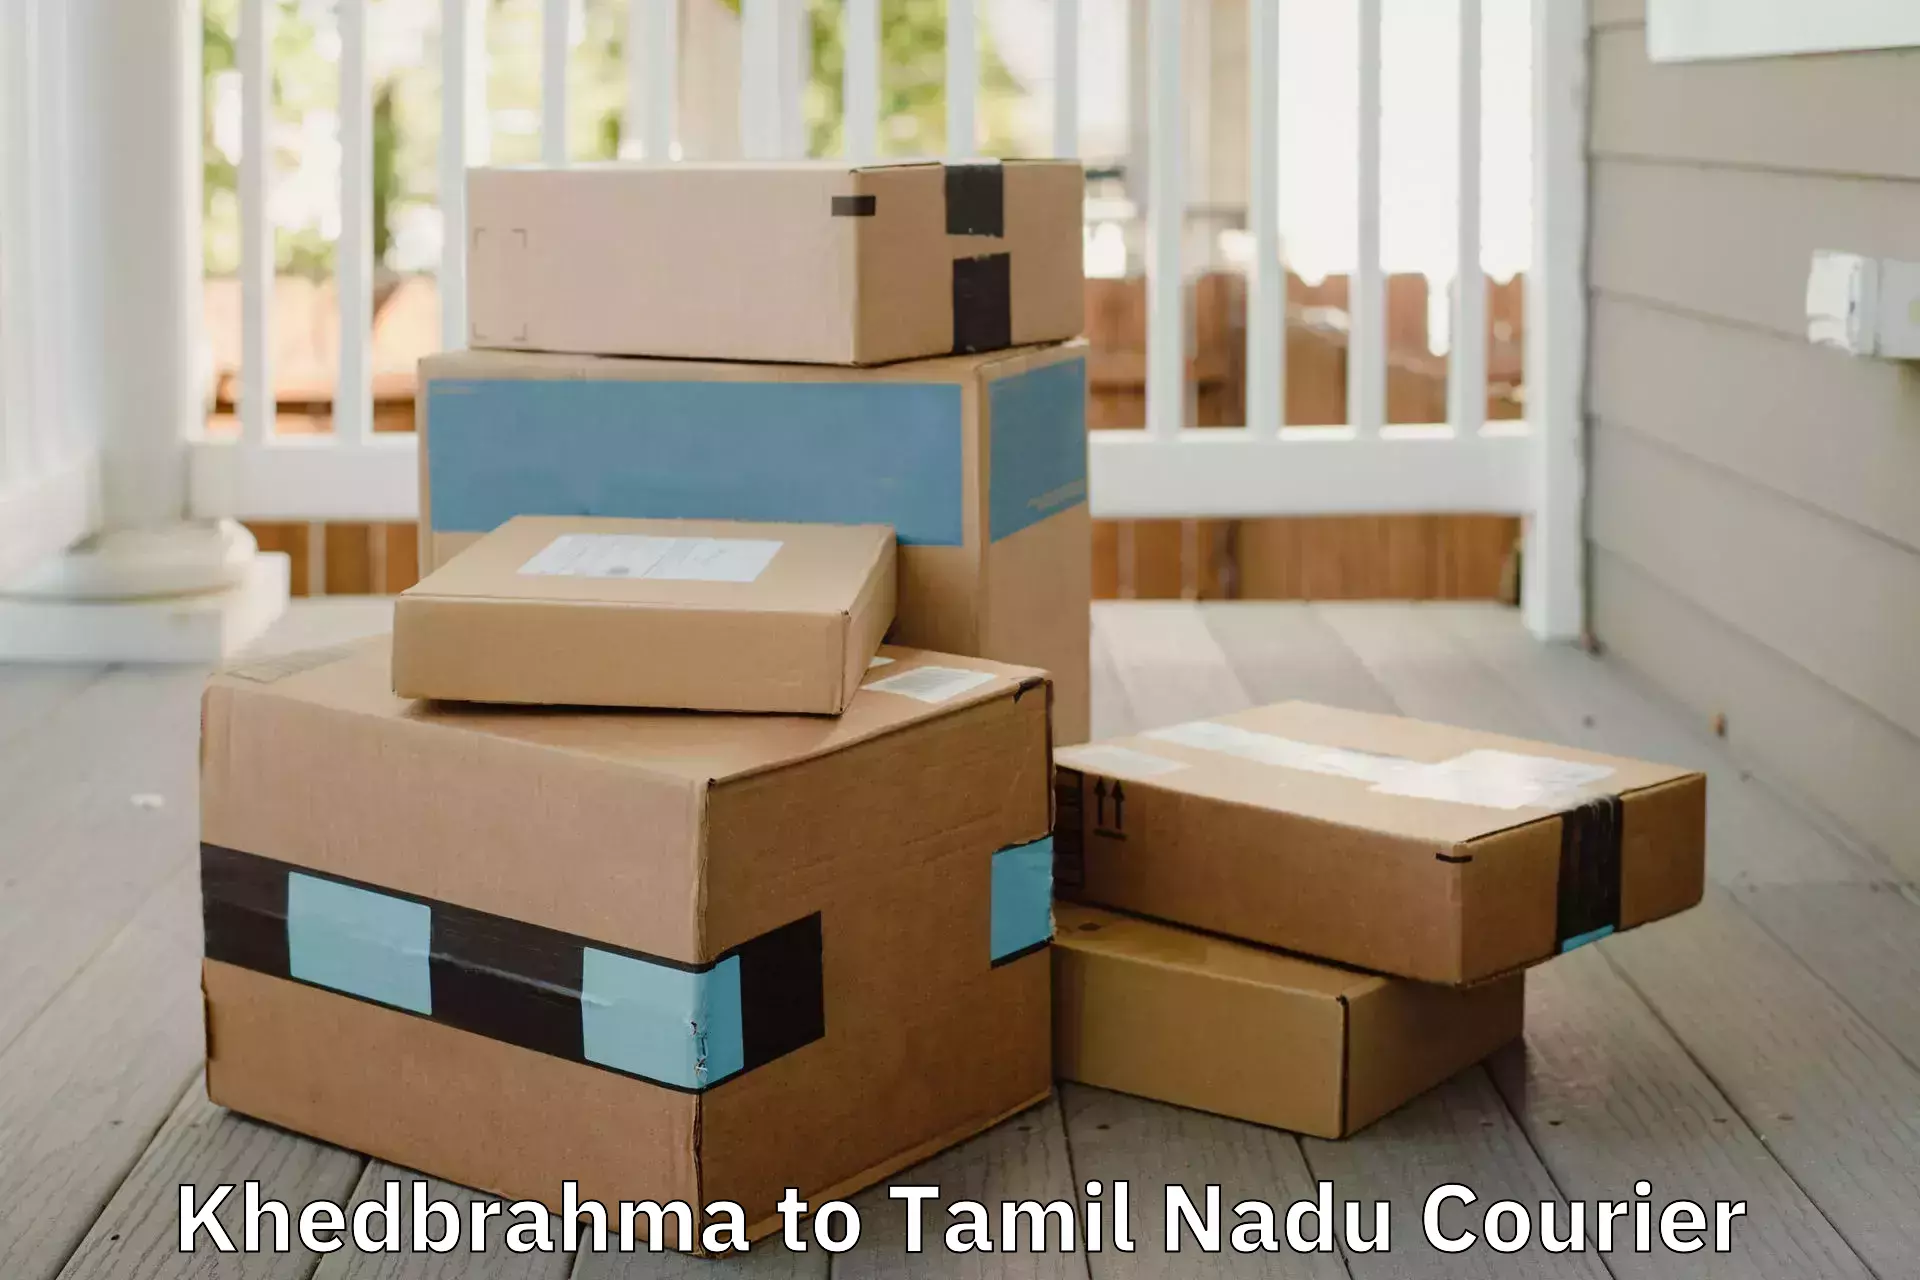 Home moving experts Khedbrahma to Dindigul